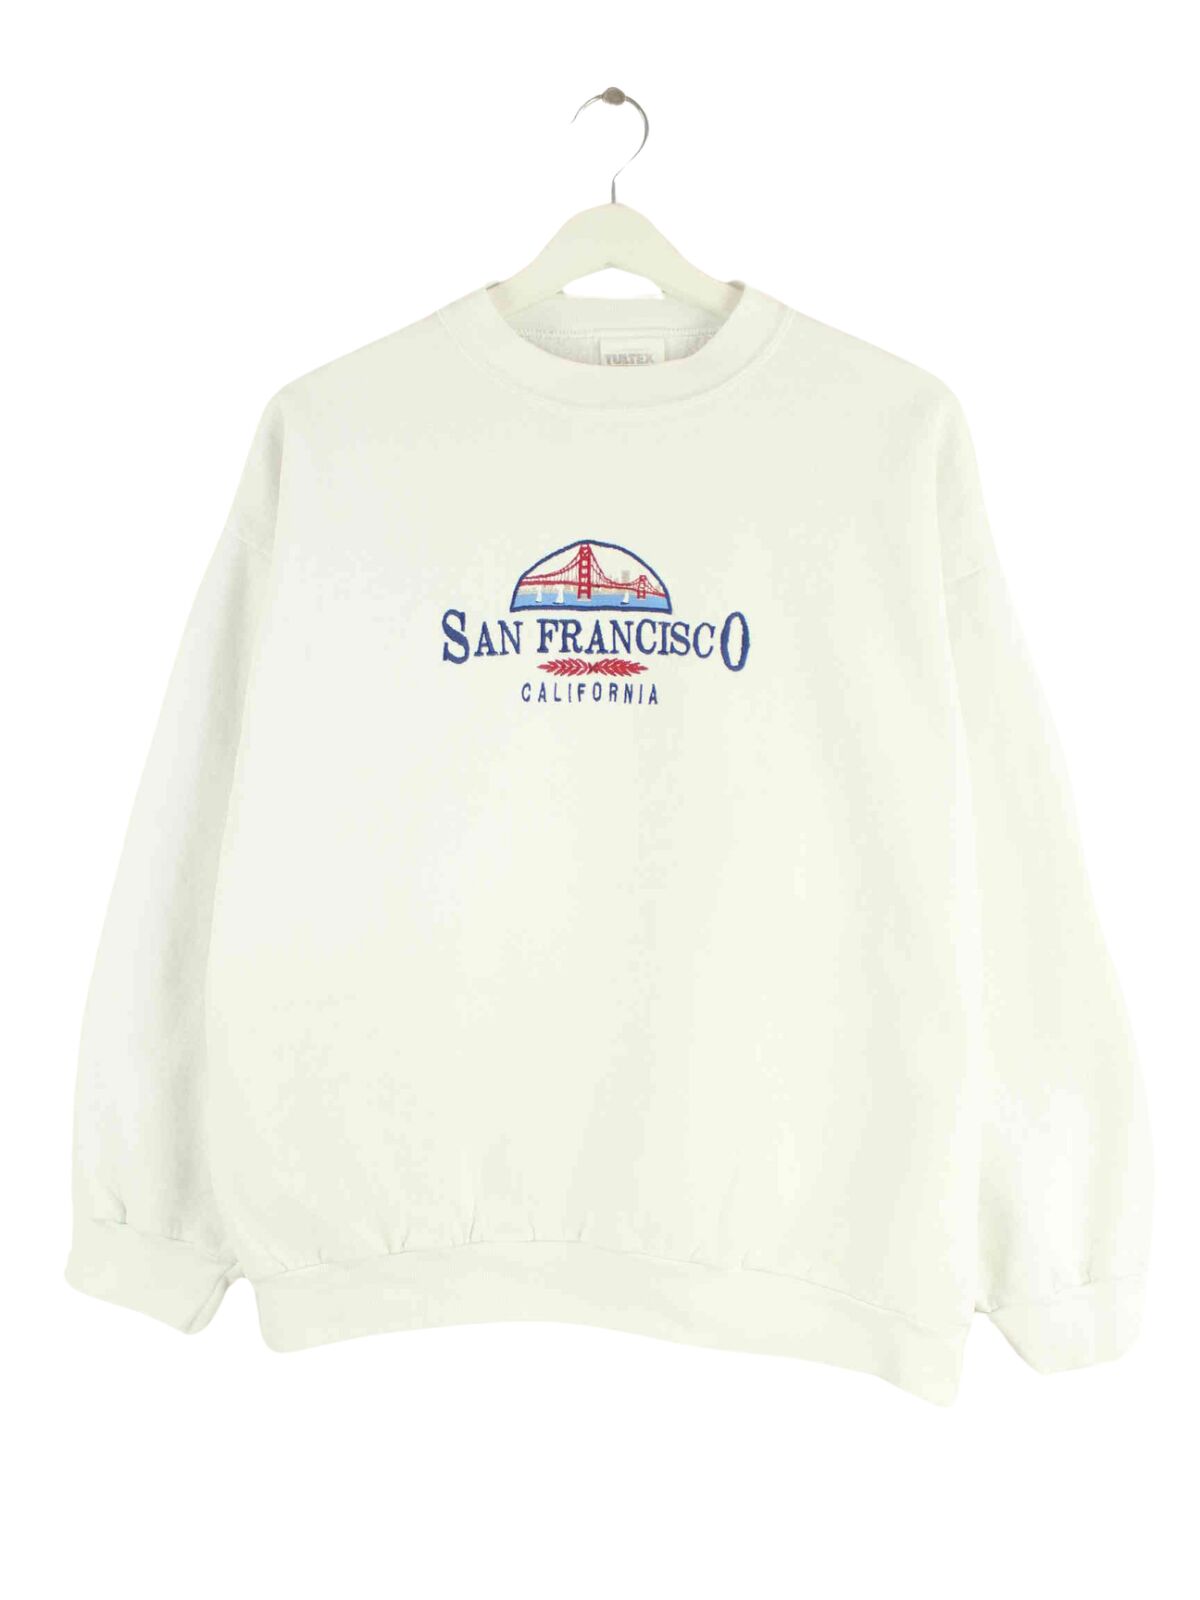 Tultex 90s Vintage San Francisco Embroidered Sweater Grau S (front image)